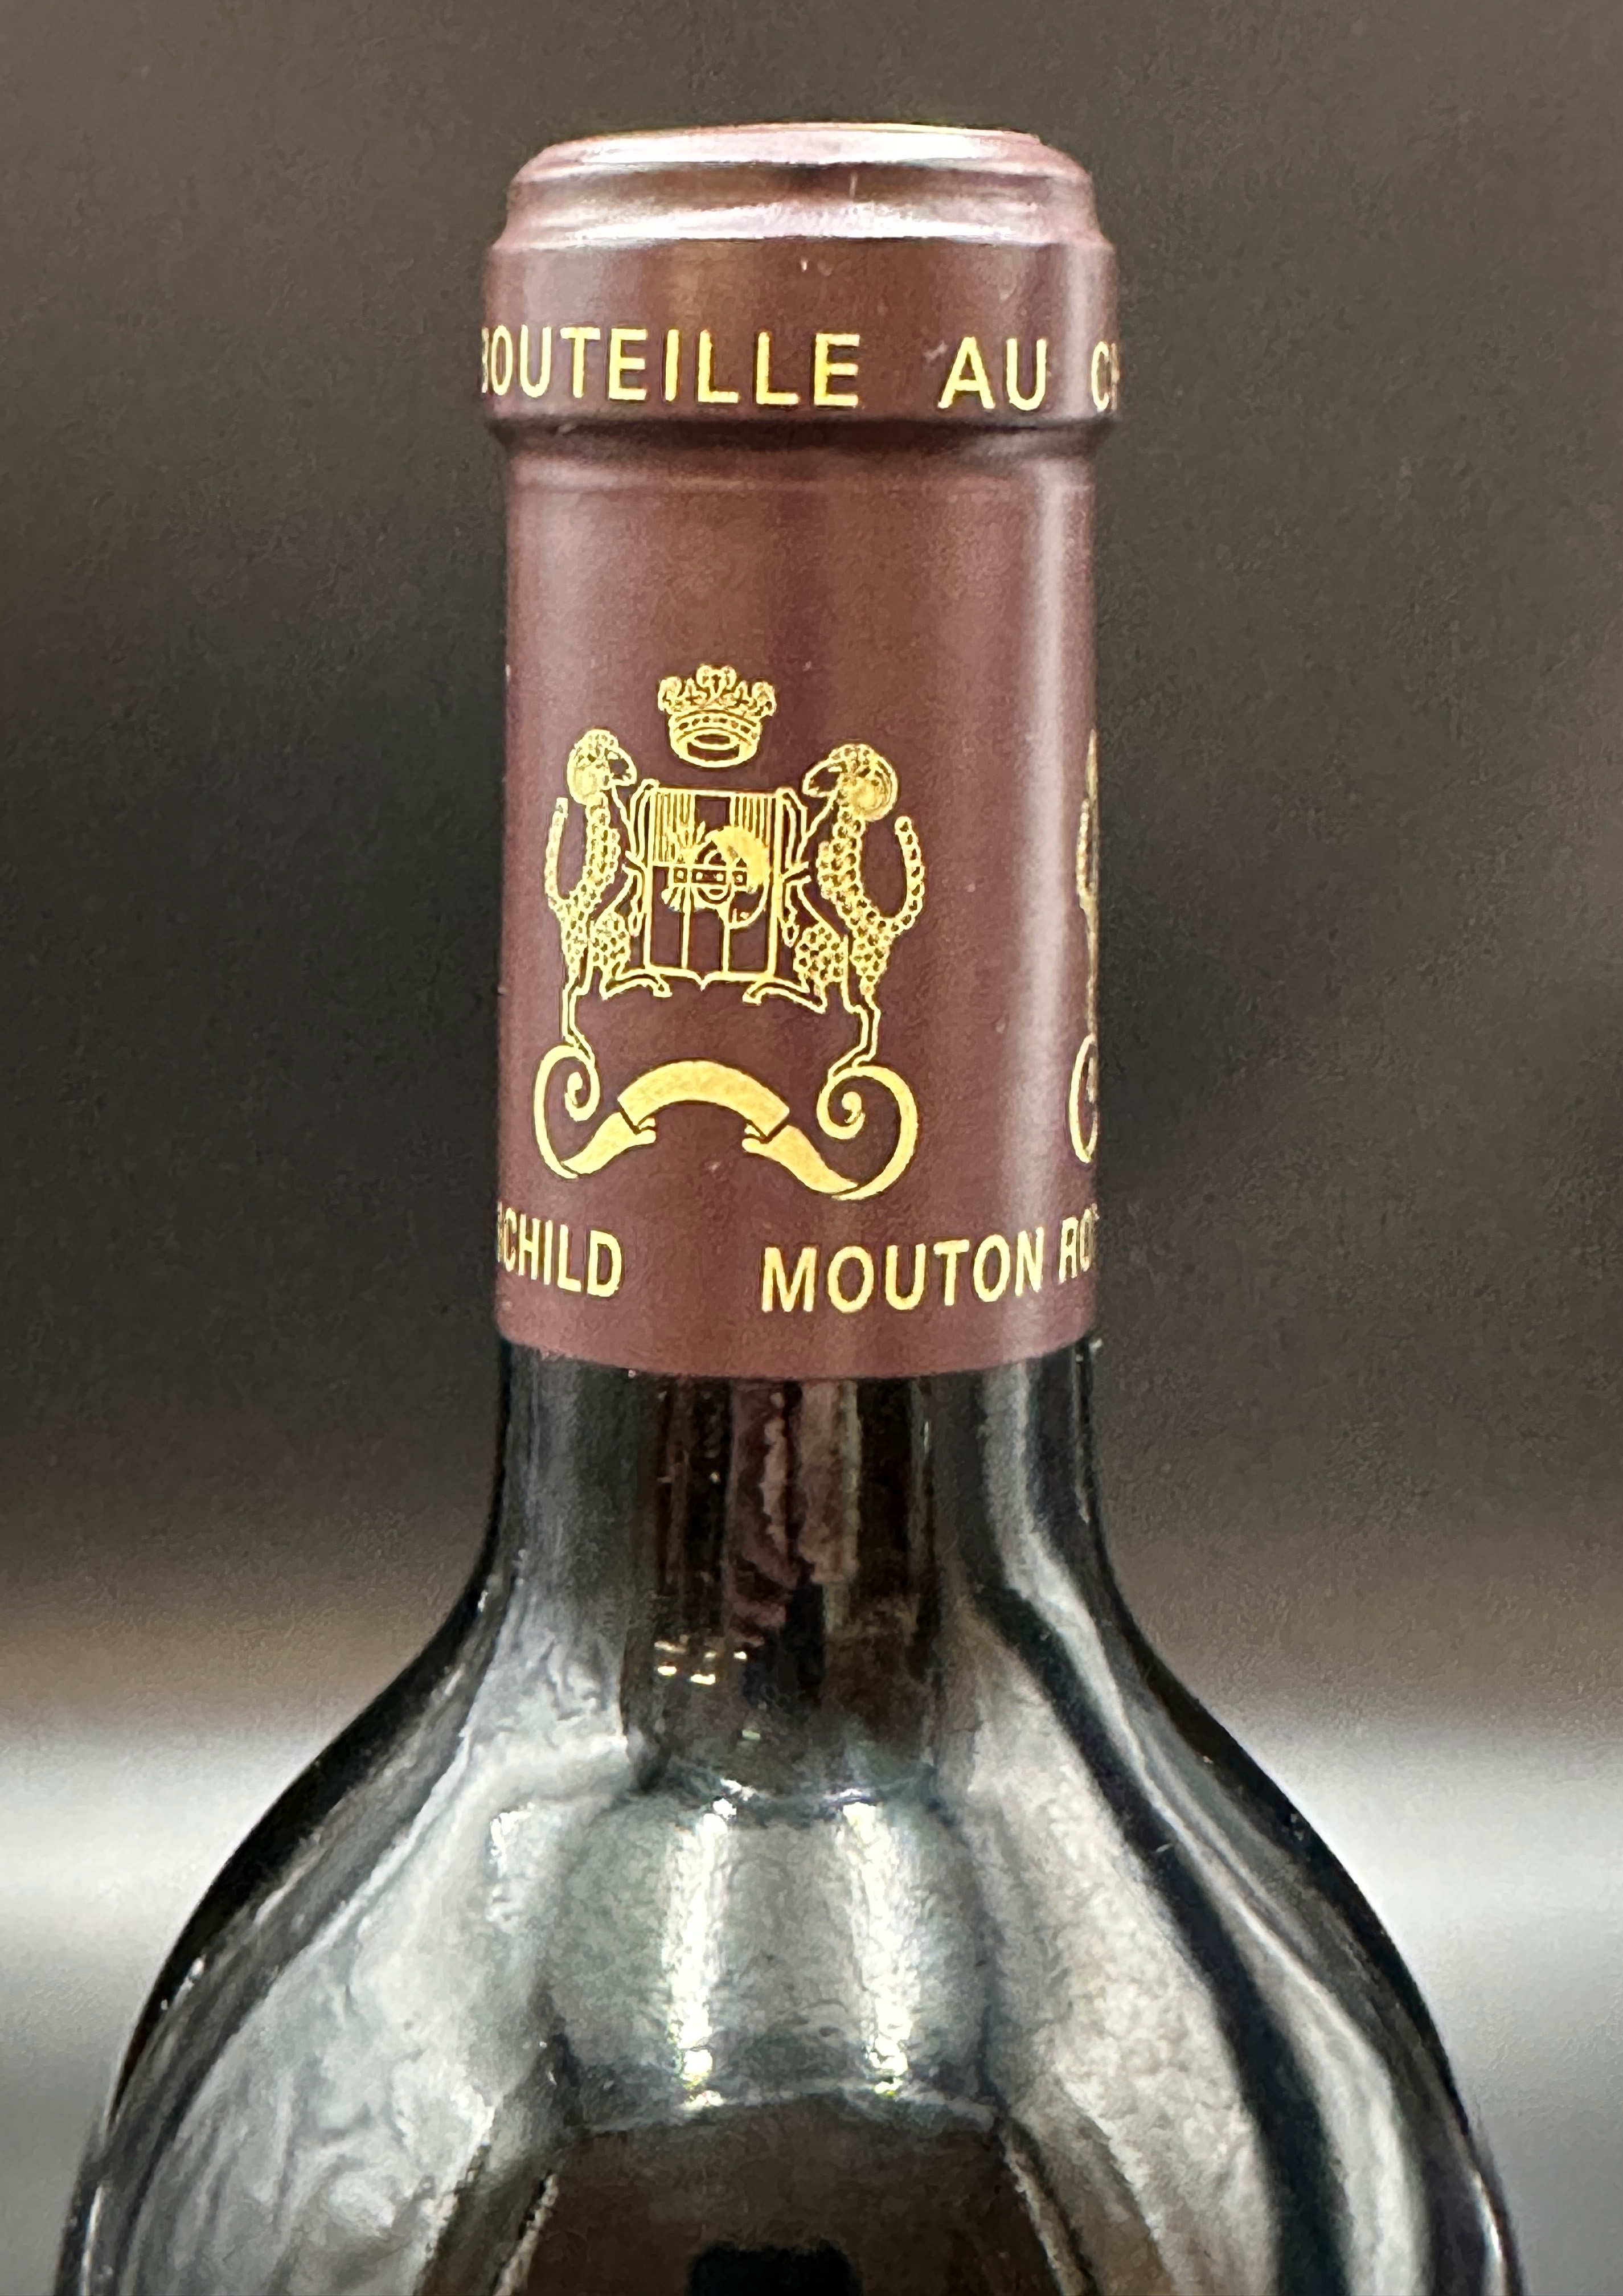 1 bottle of red wine. Château Mouton ROTHSCHILD. Pauillac. 2003. France. - Image 4 of 5